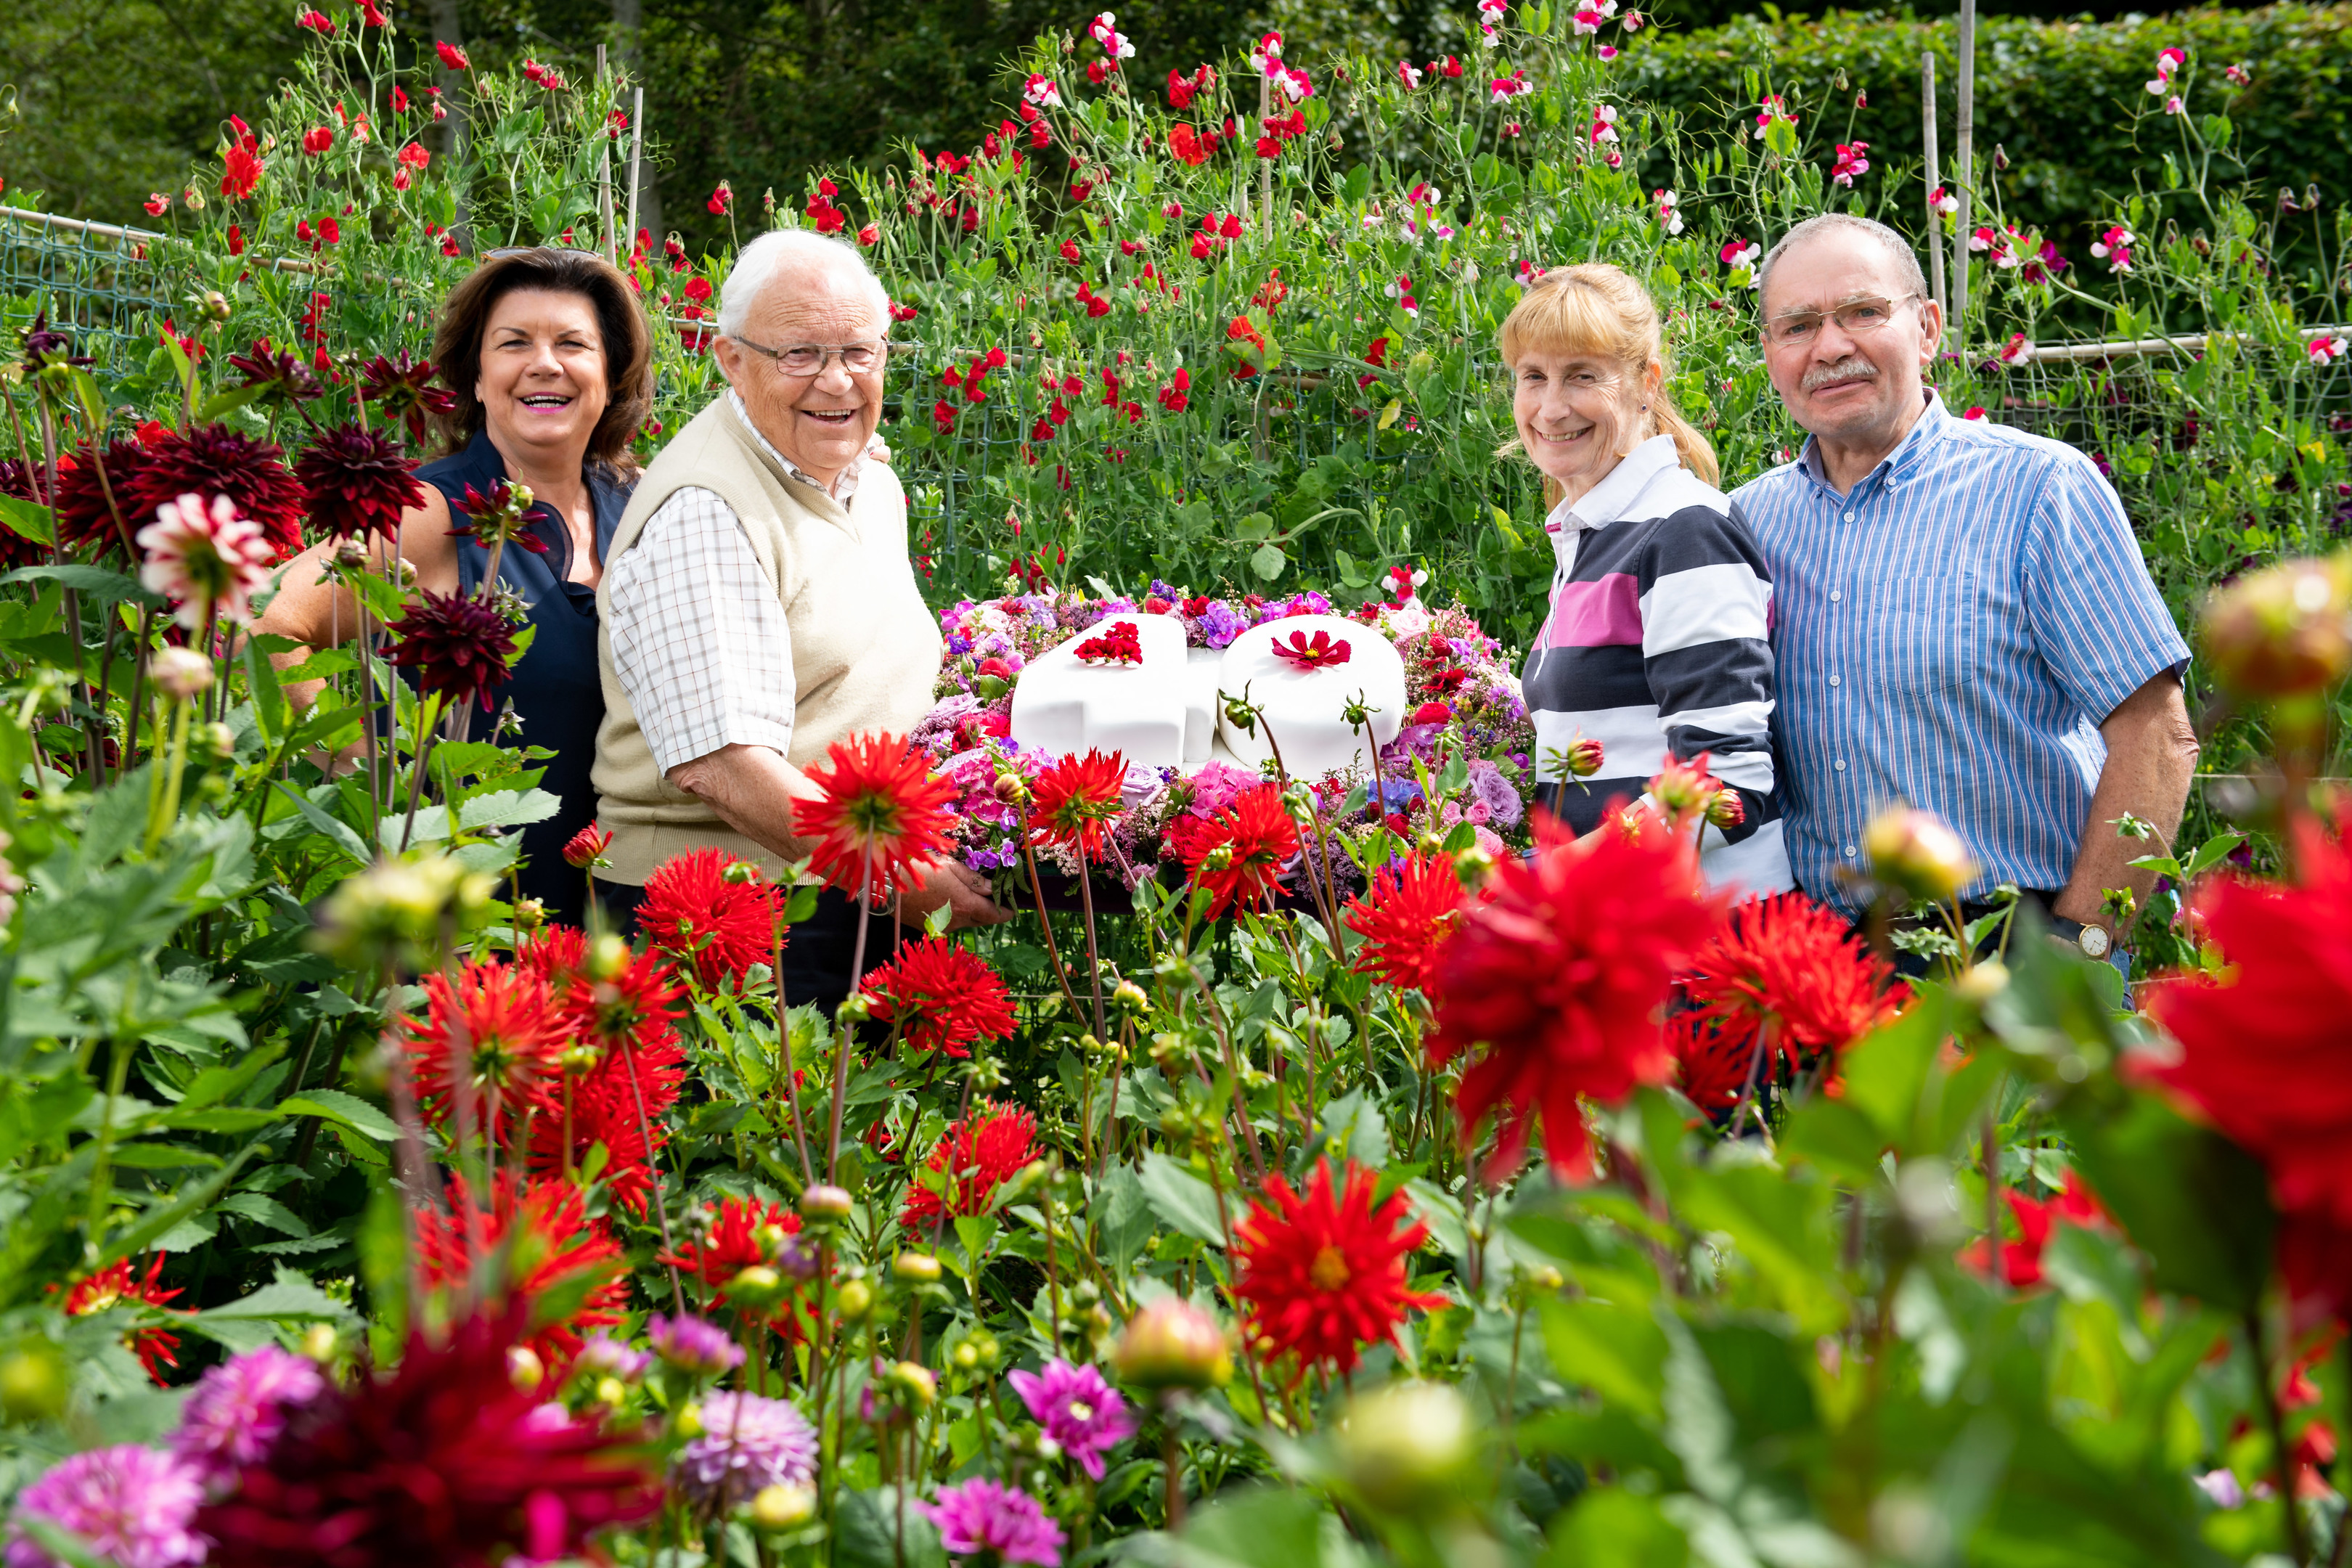 Becchgrove Garden hosts Jim McColl, Carole Baxter and George Anderson with Elaine C. Smith (Richard Frew Photography)